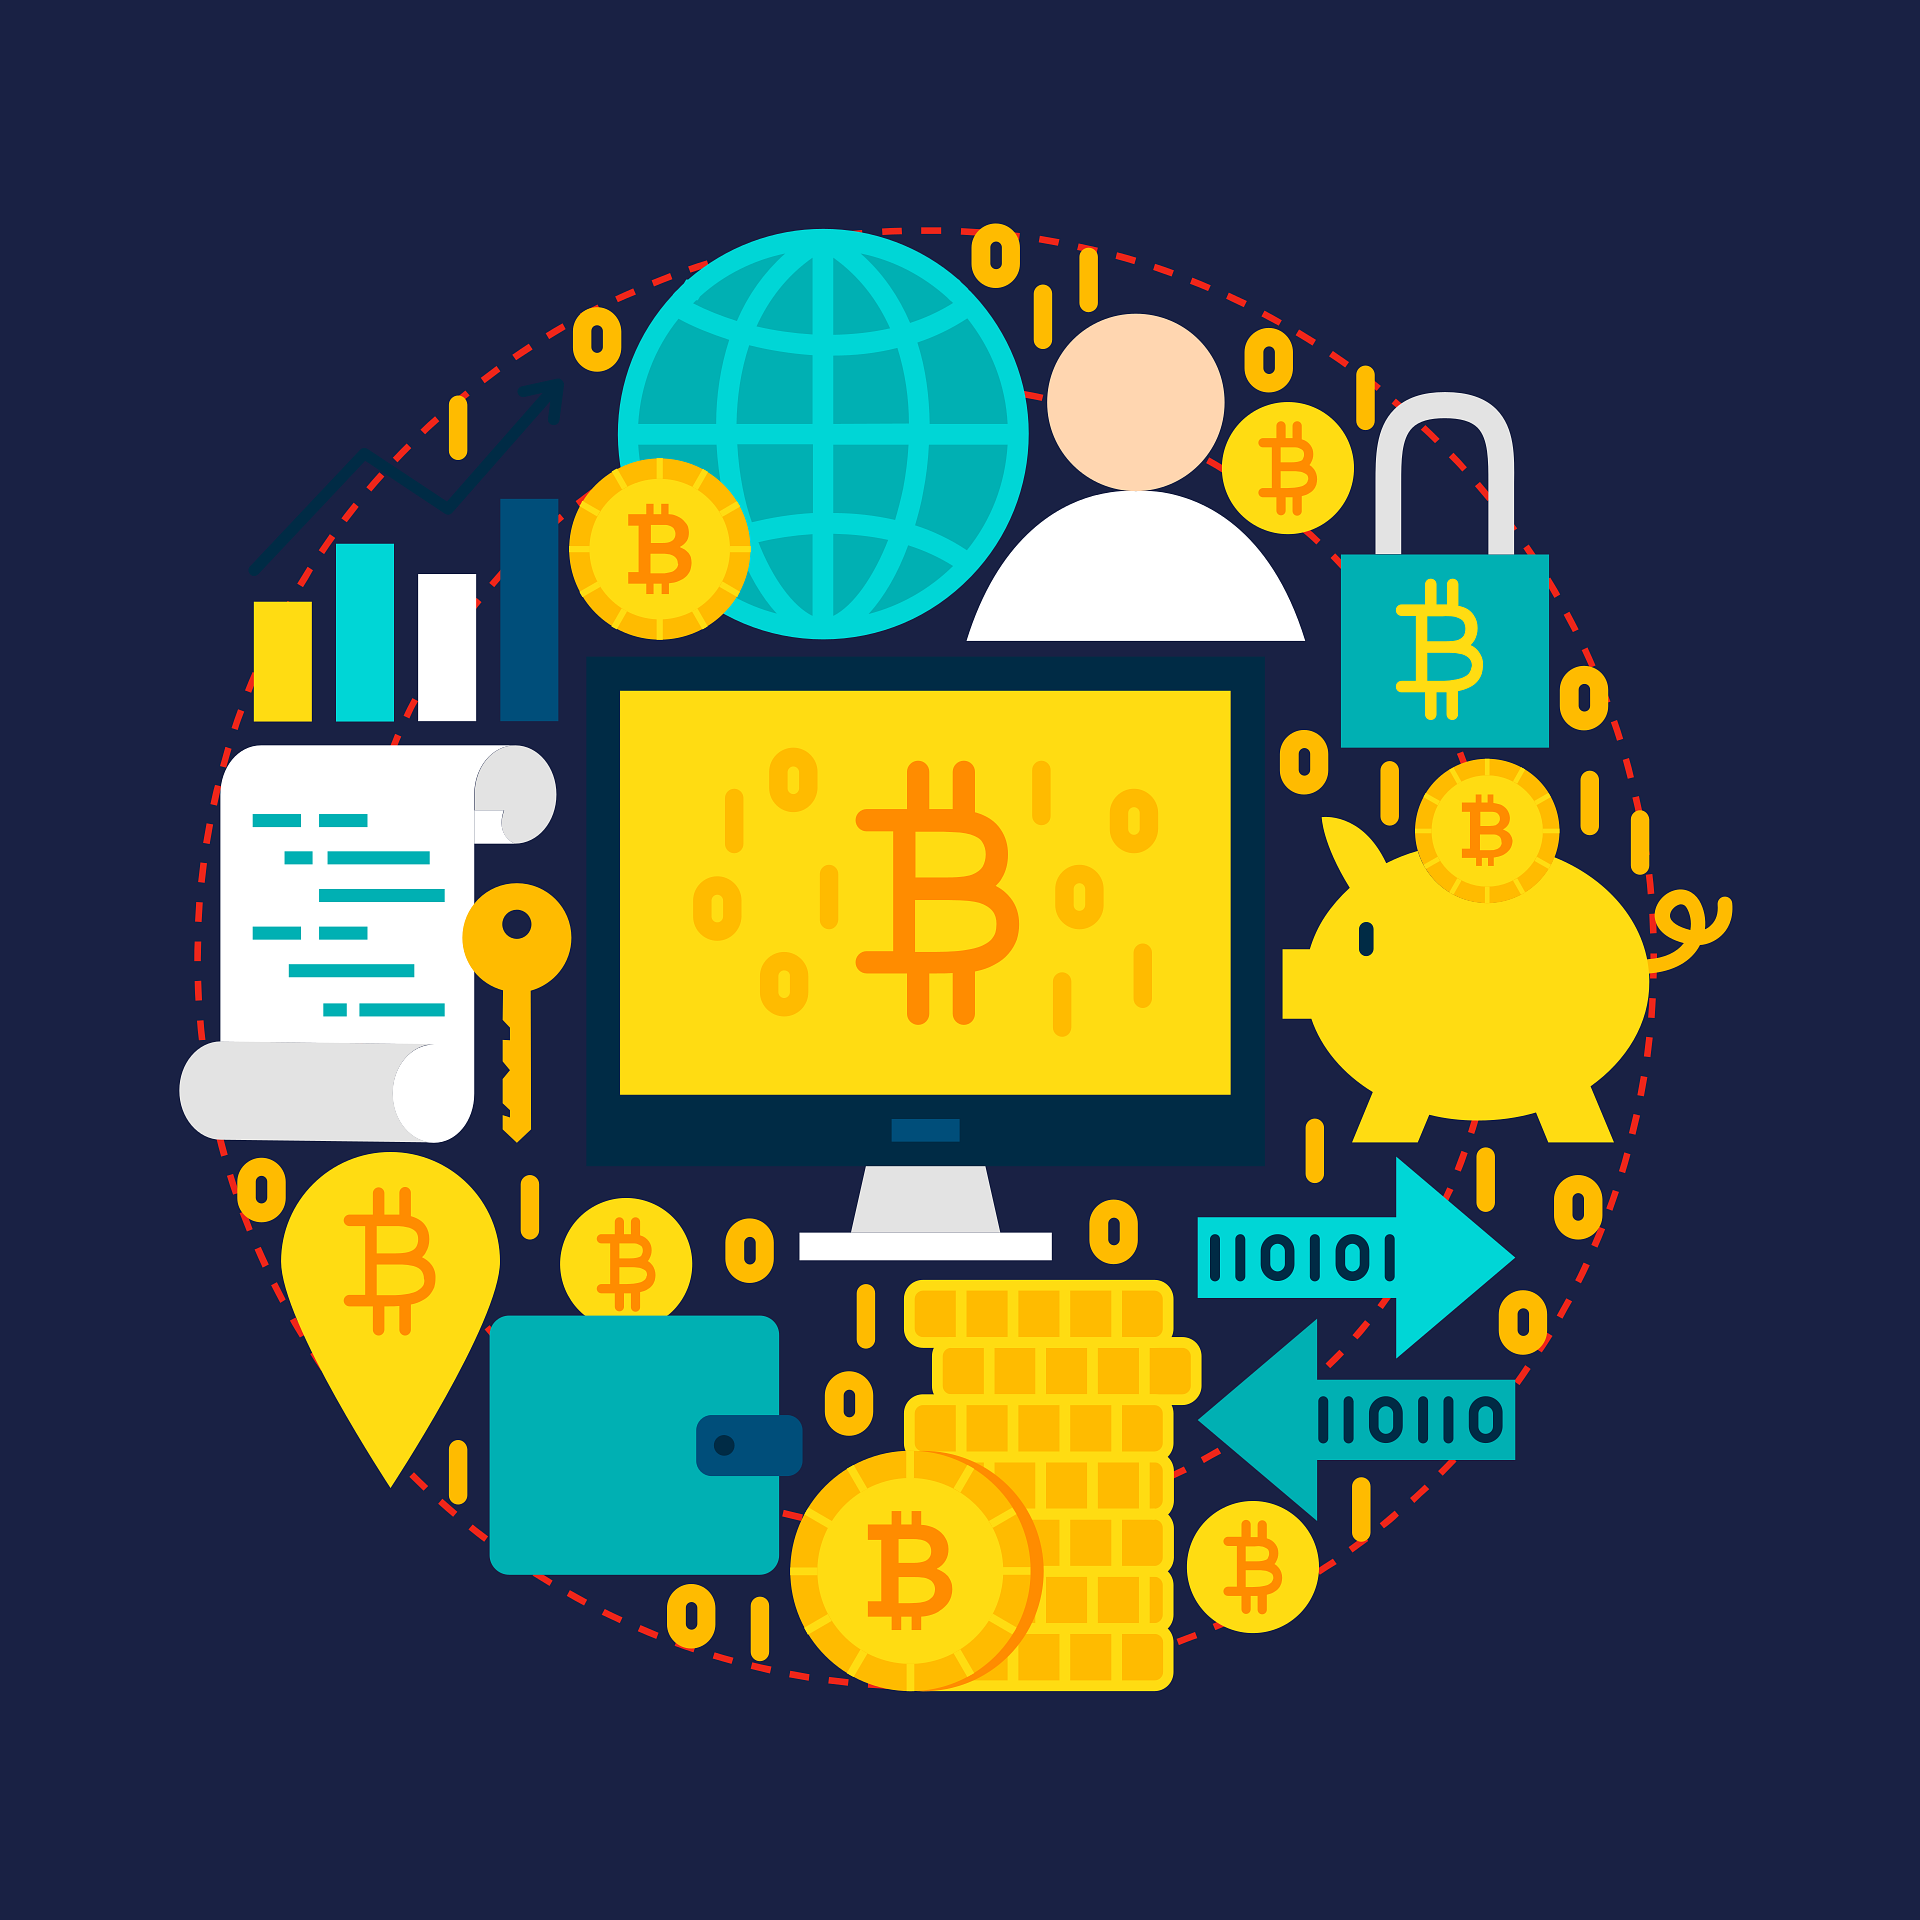 Adopting Blockchain for Secure Transactions